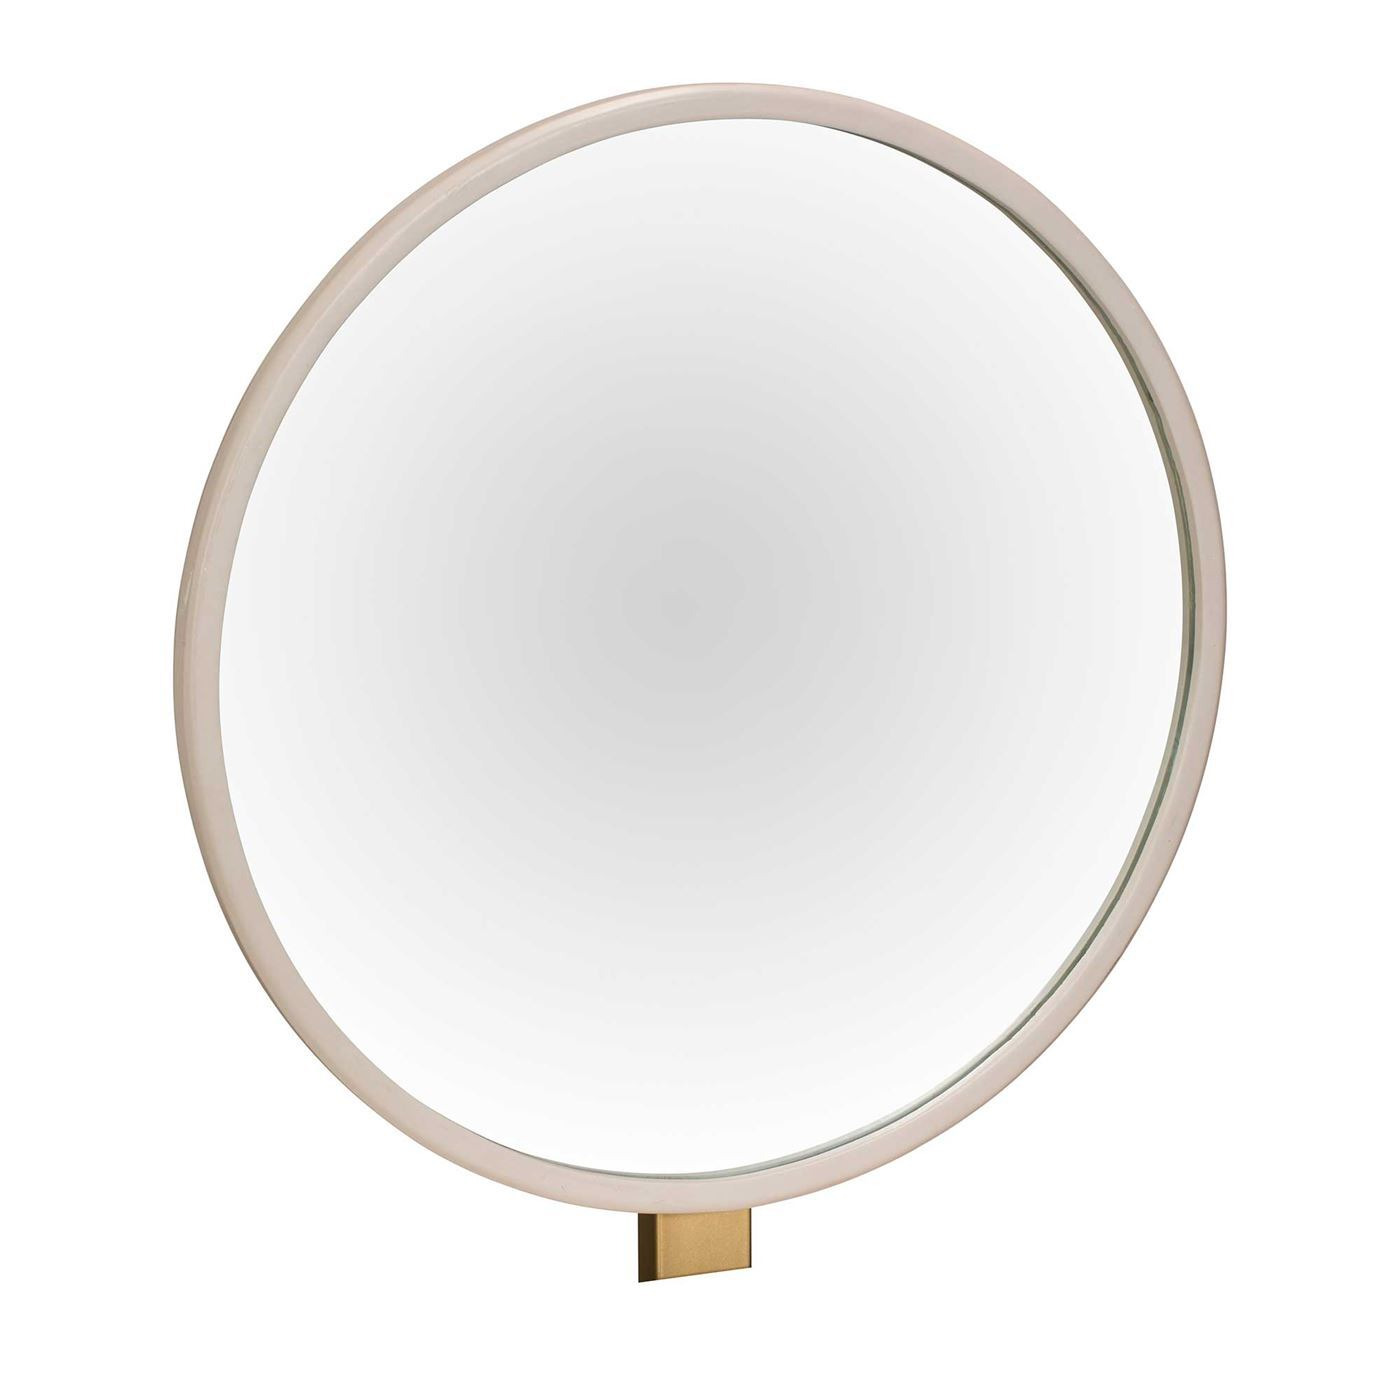 Lucia Gallery Mirror, Round, Neutral Wood - Barker & Stonehouse - image 1